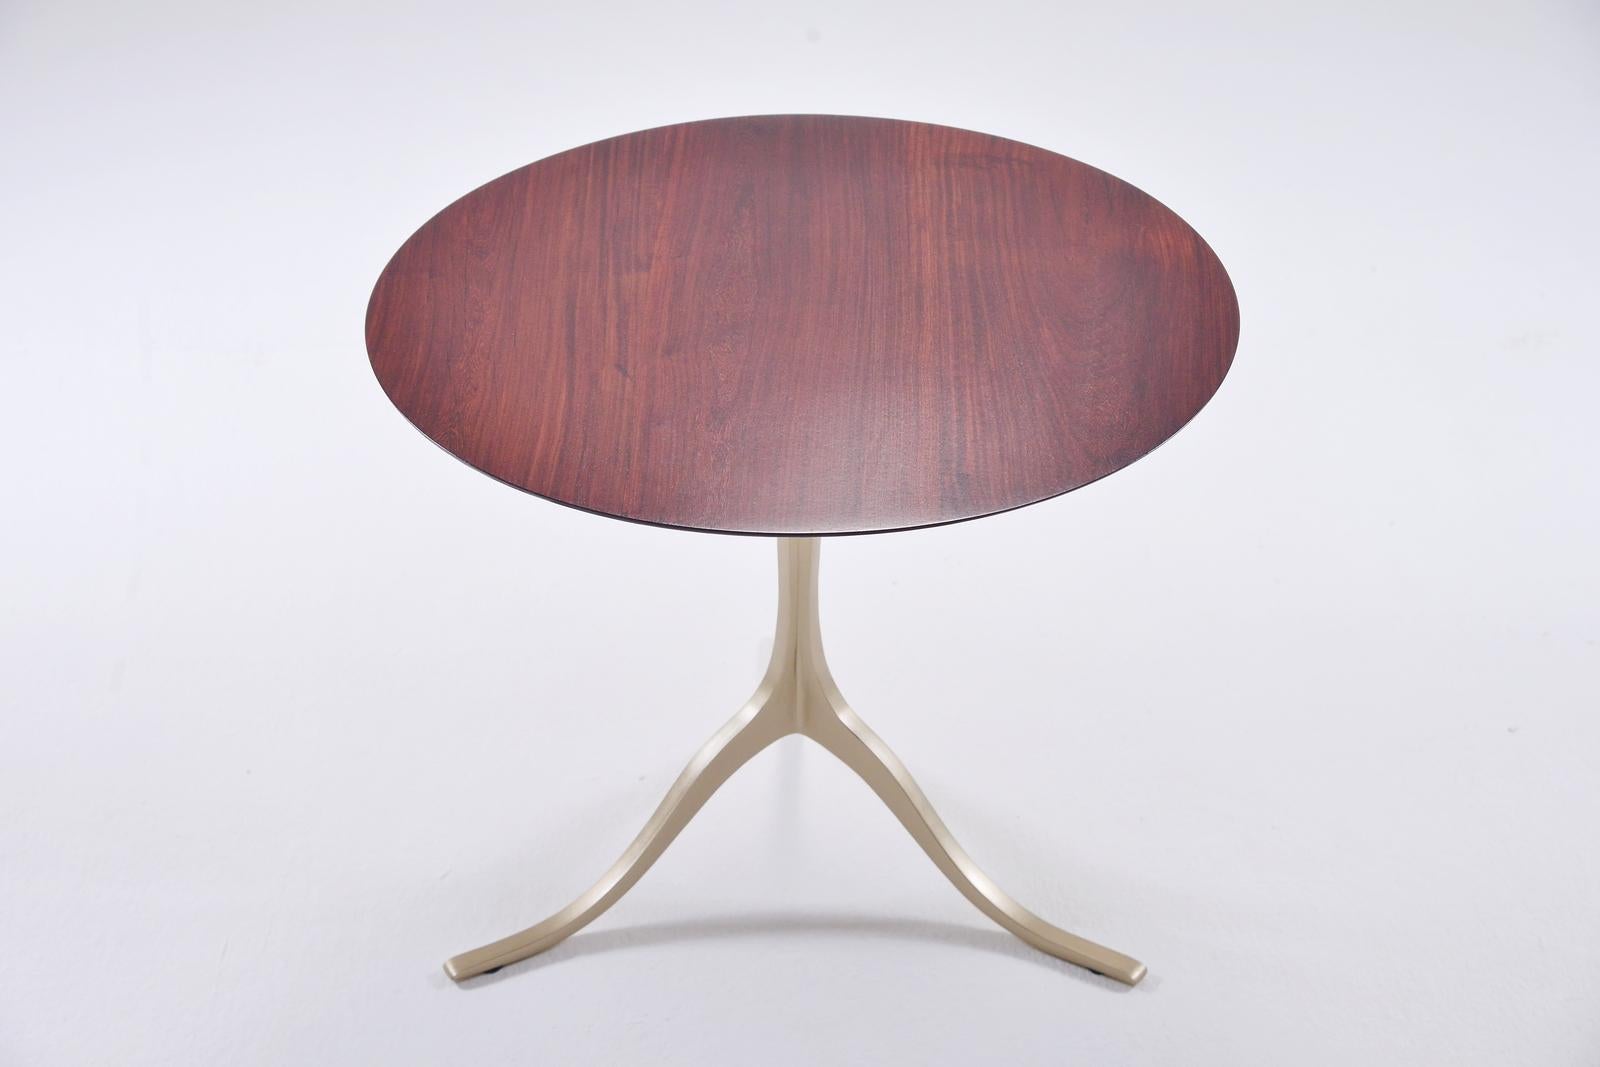 This latest round table comes in two sizes heights, with the wooden top of your choice. This table is H 42 cm H 26.53